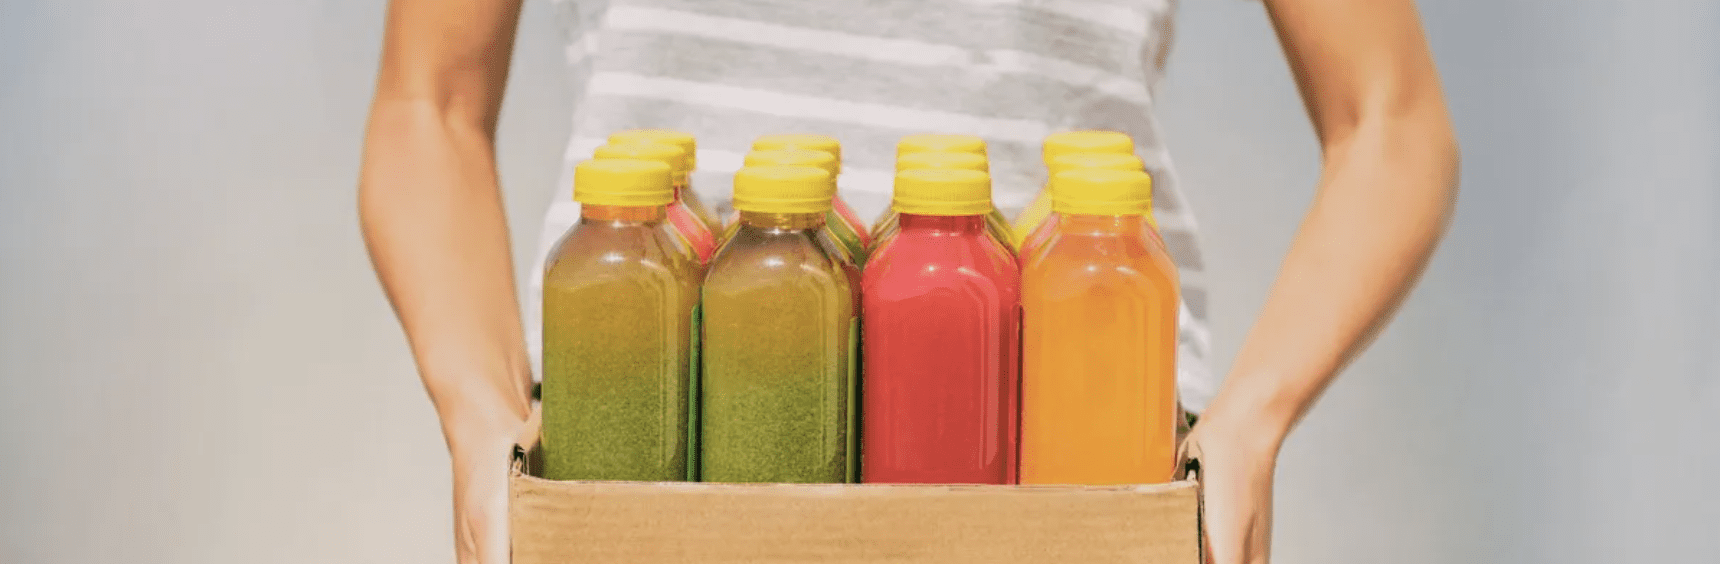 Pursuing a Commercial Juicing Opportunities? These Mistakes Can Hurt Quality